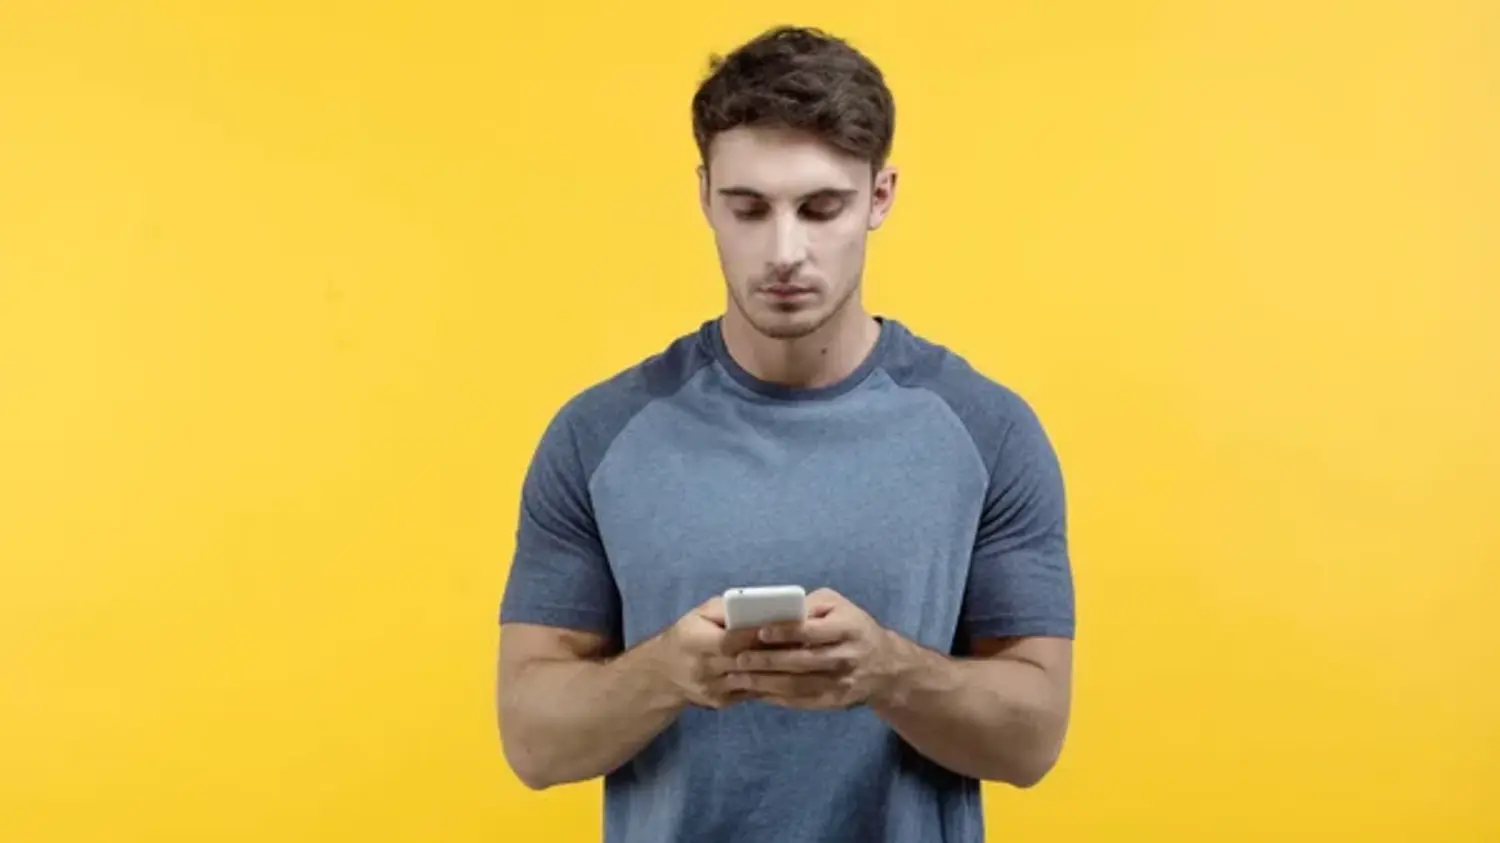 Signs He Is Losing Interest via Texting